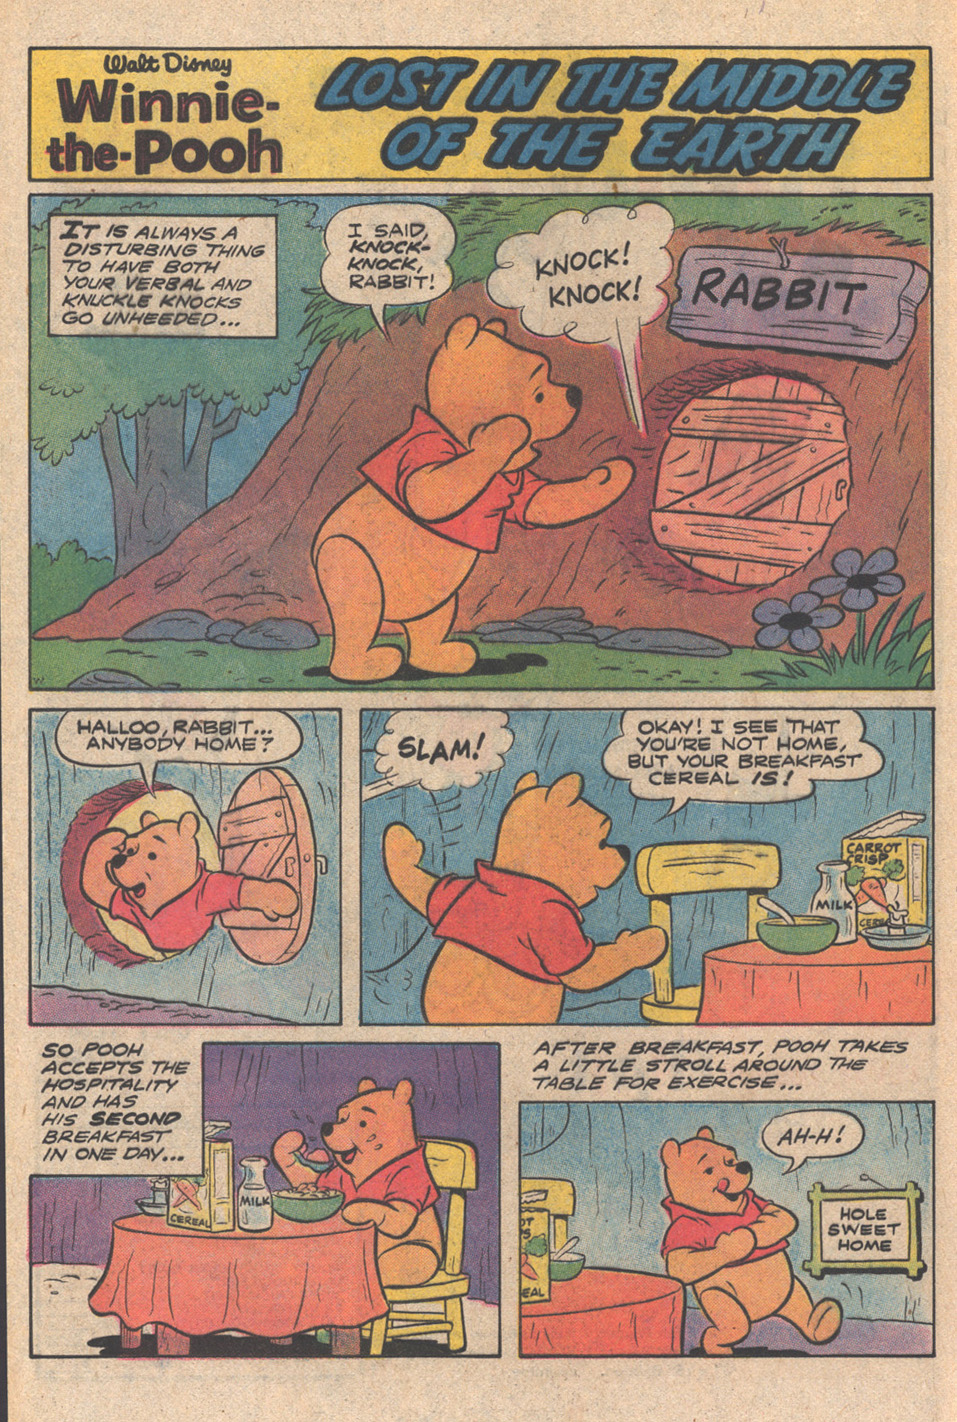 Read online Winnie-the-Pooh comic -  Issue #7 - 20